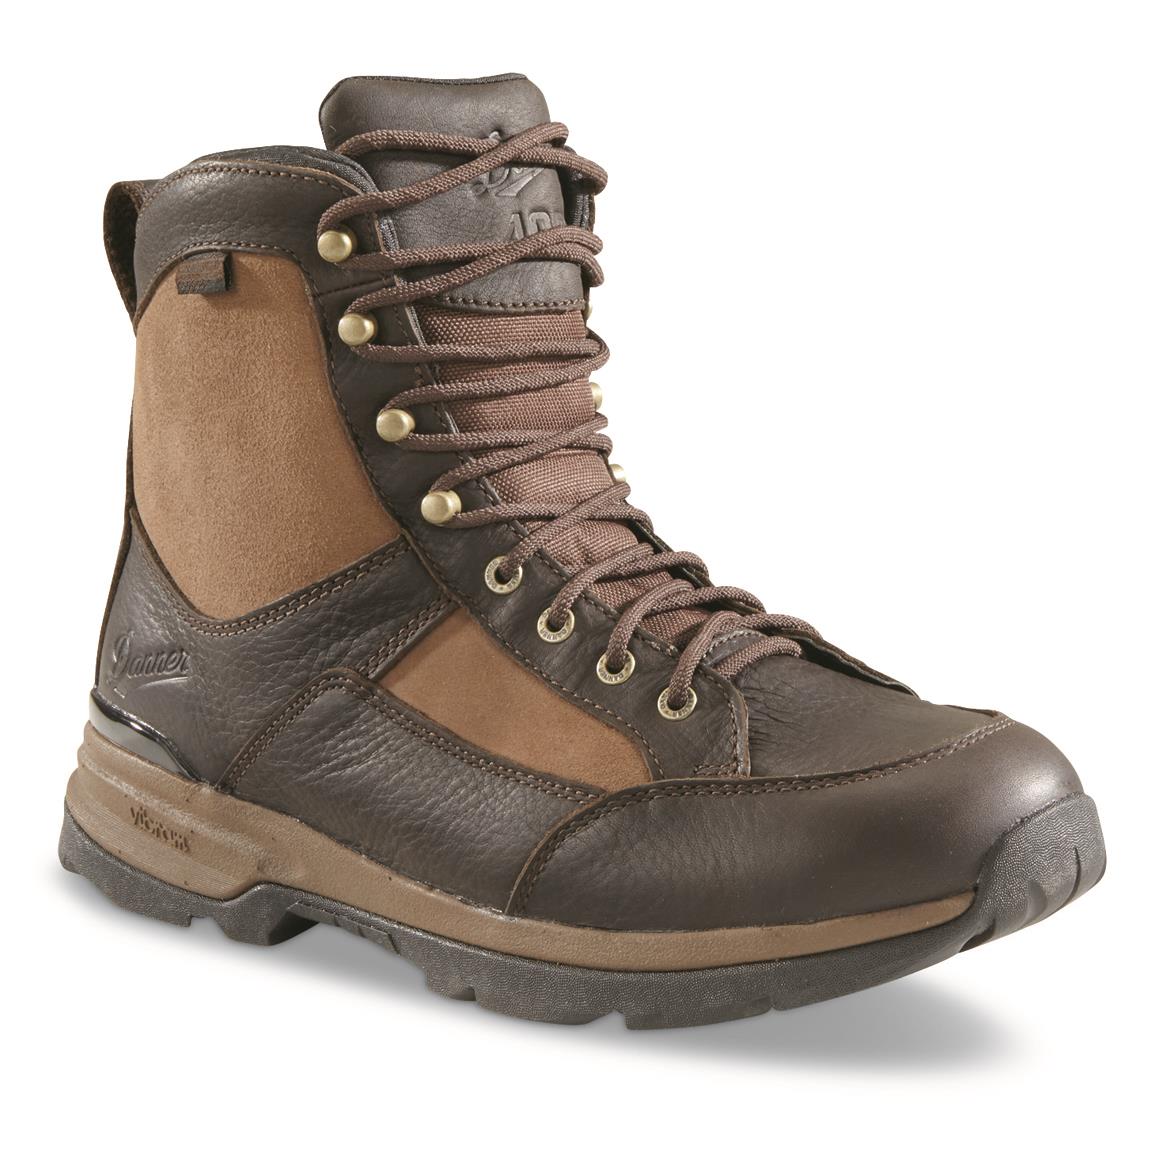 Danner Recurve 7" Waterproof Insulated Hunting Boots, 400 Gram, Brown